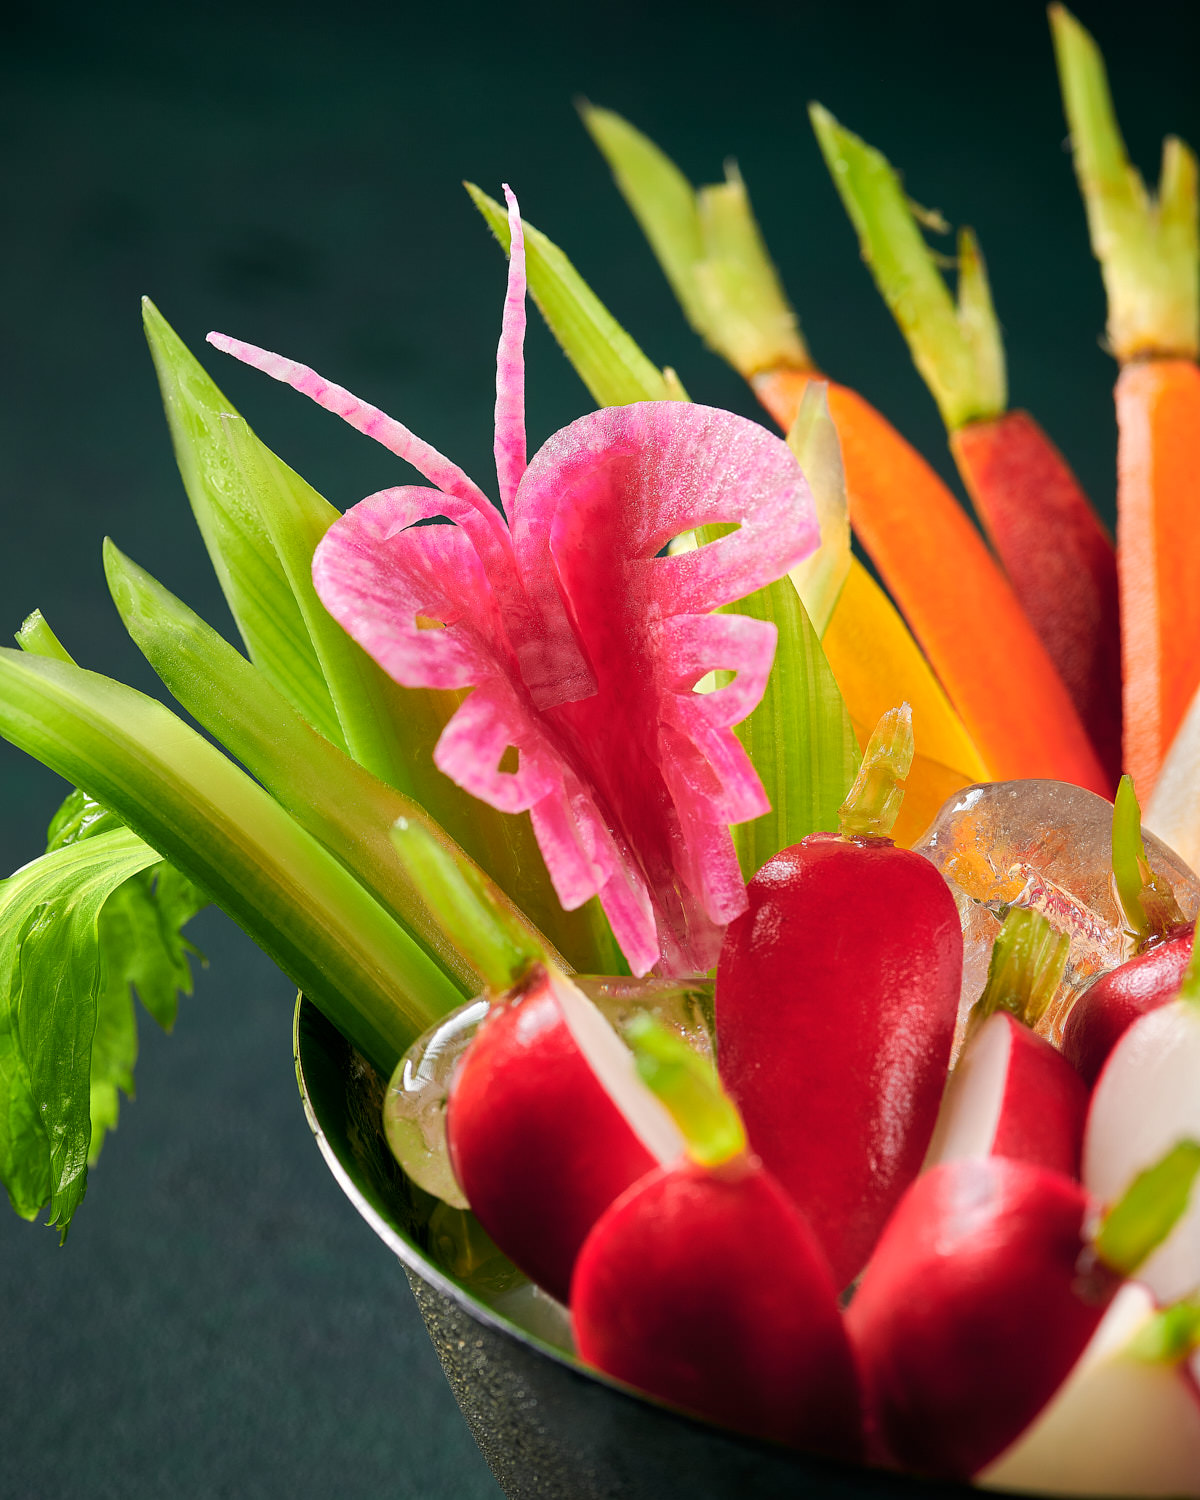 Editorial Cookbook Food Photography of Celery, Carrots, and Radishes